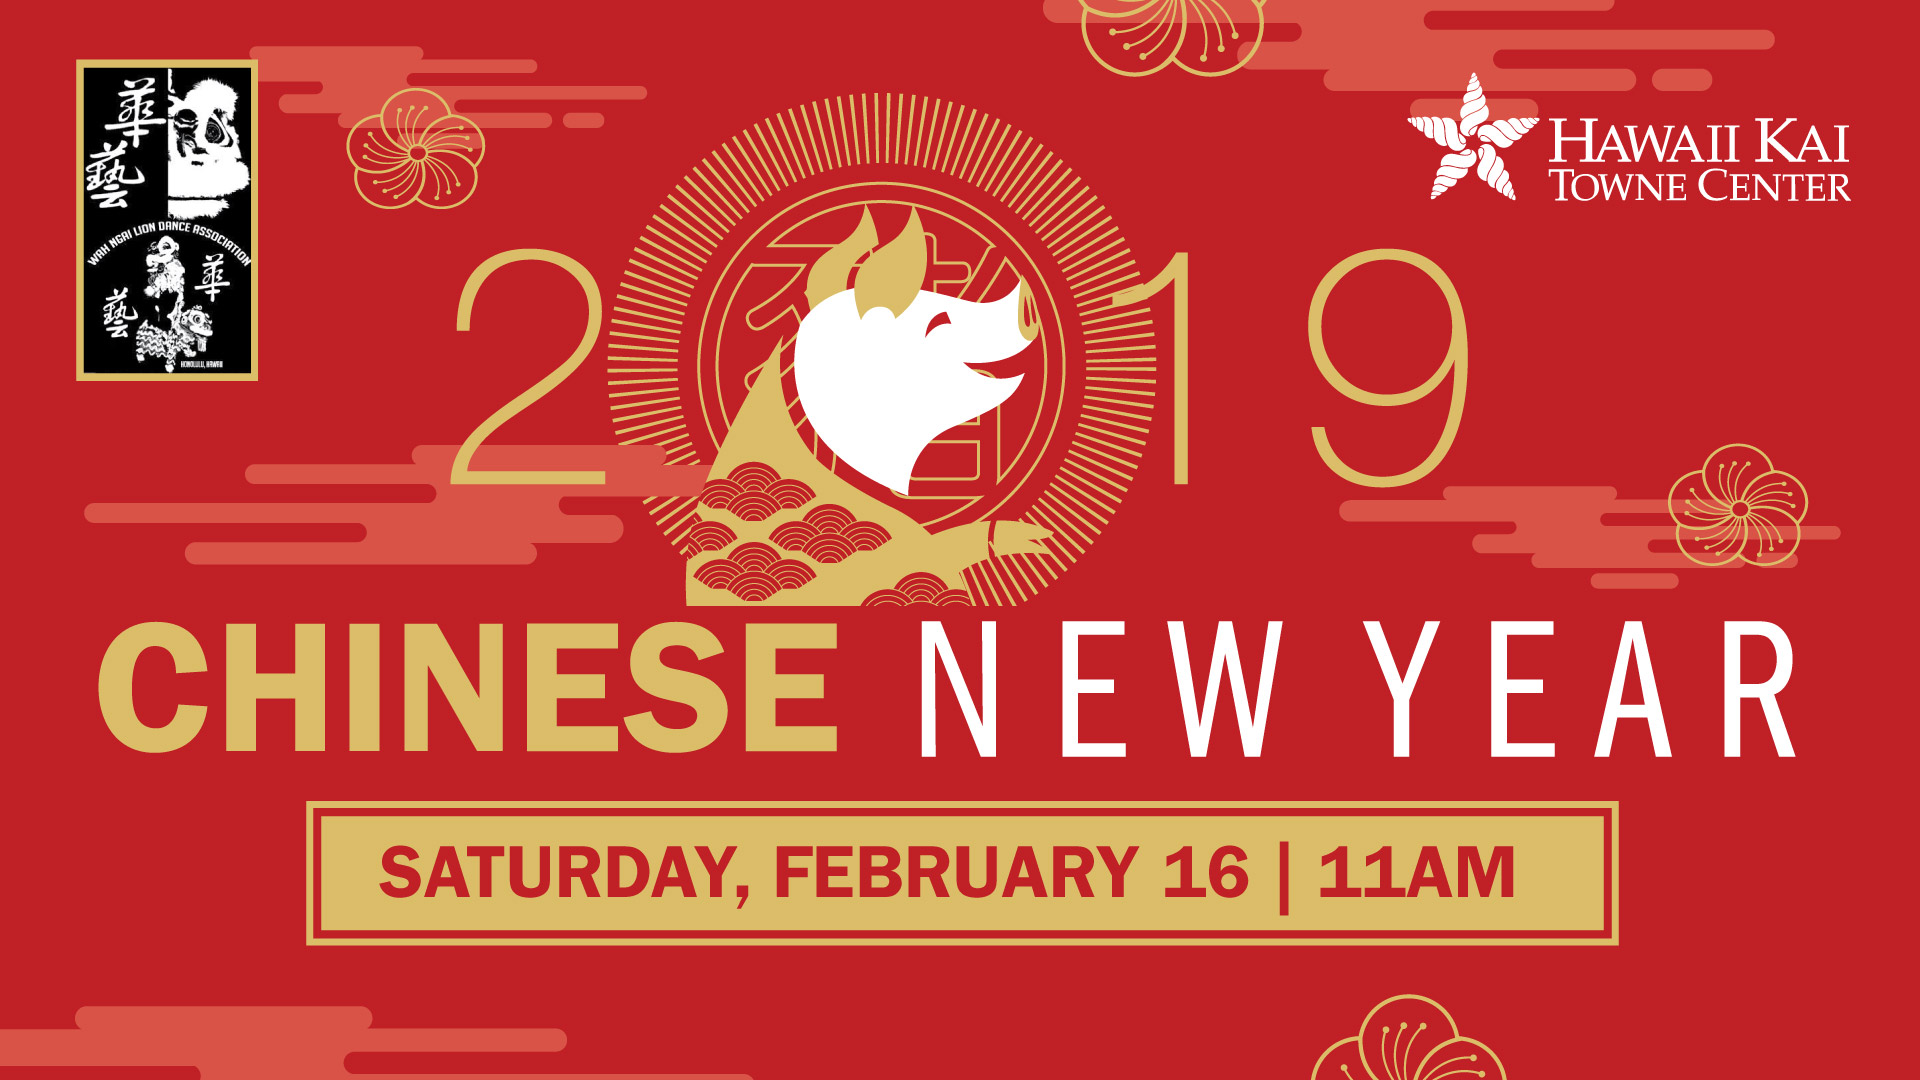 HKTC-Chinese-New-Year-2019-FB-banner